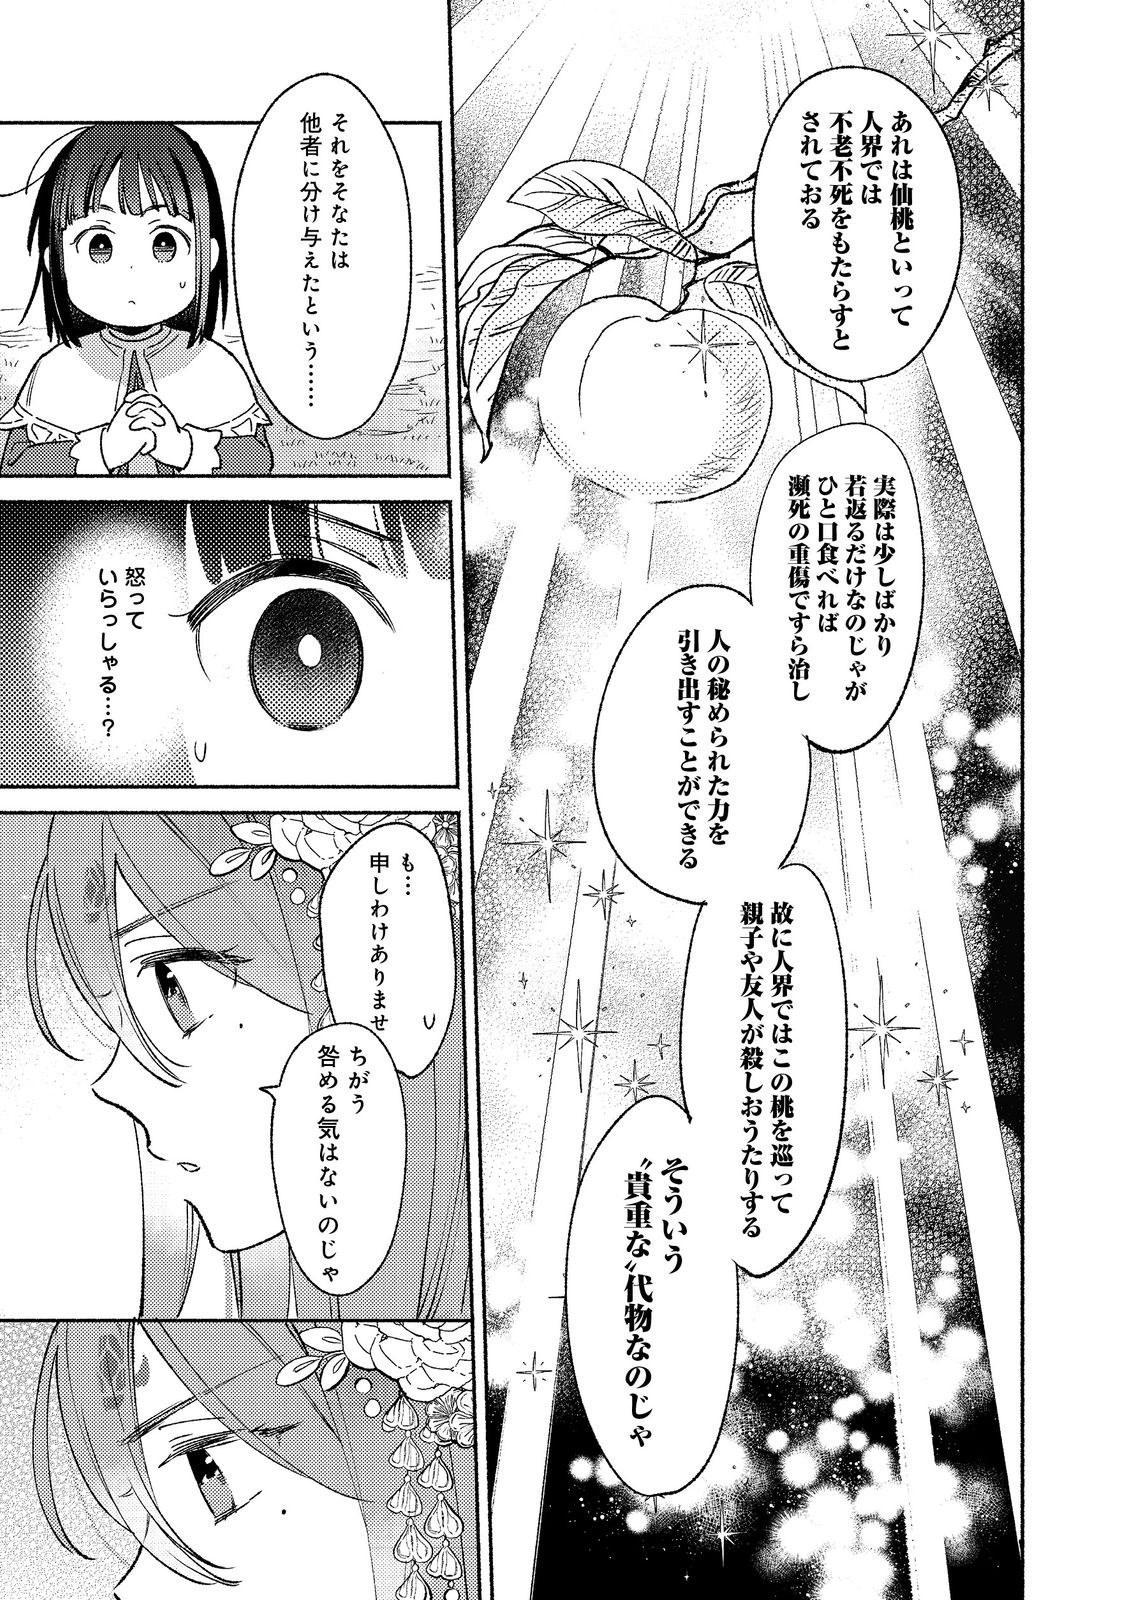 I’m the White Pig Nobleman 第16.1話 - Page 4